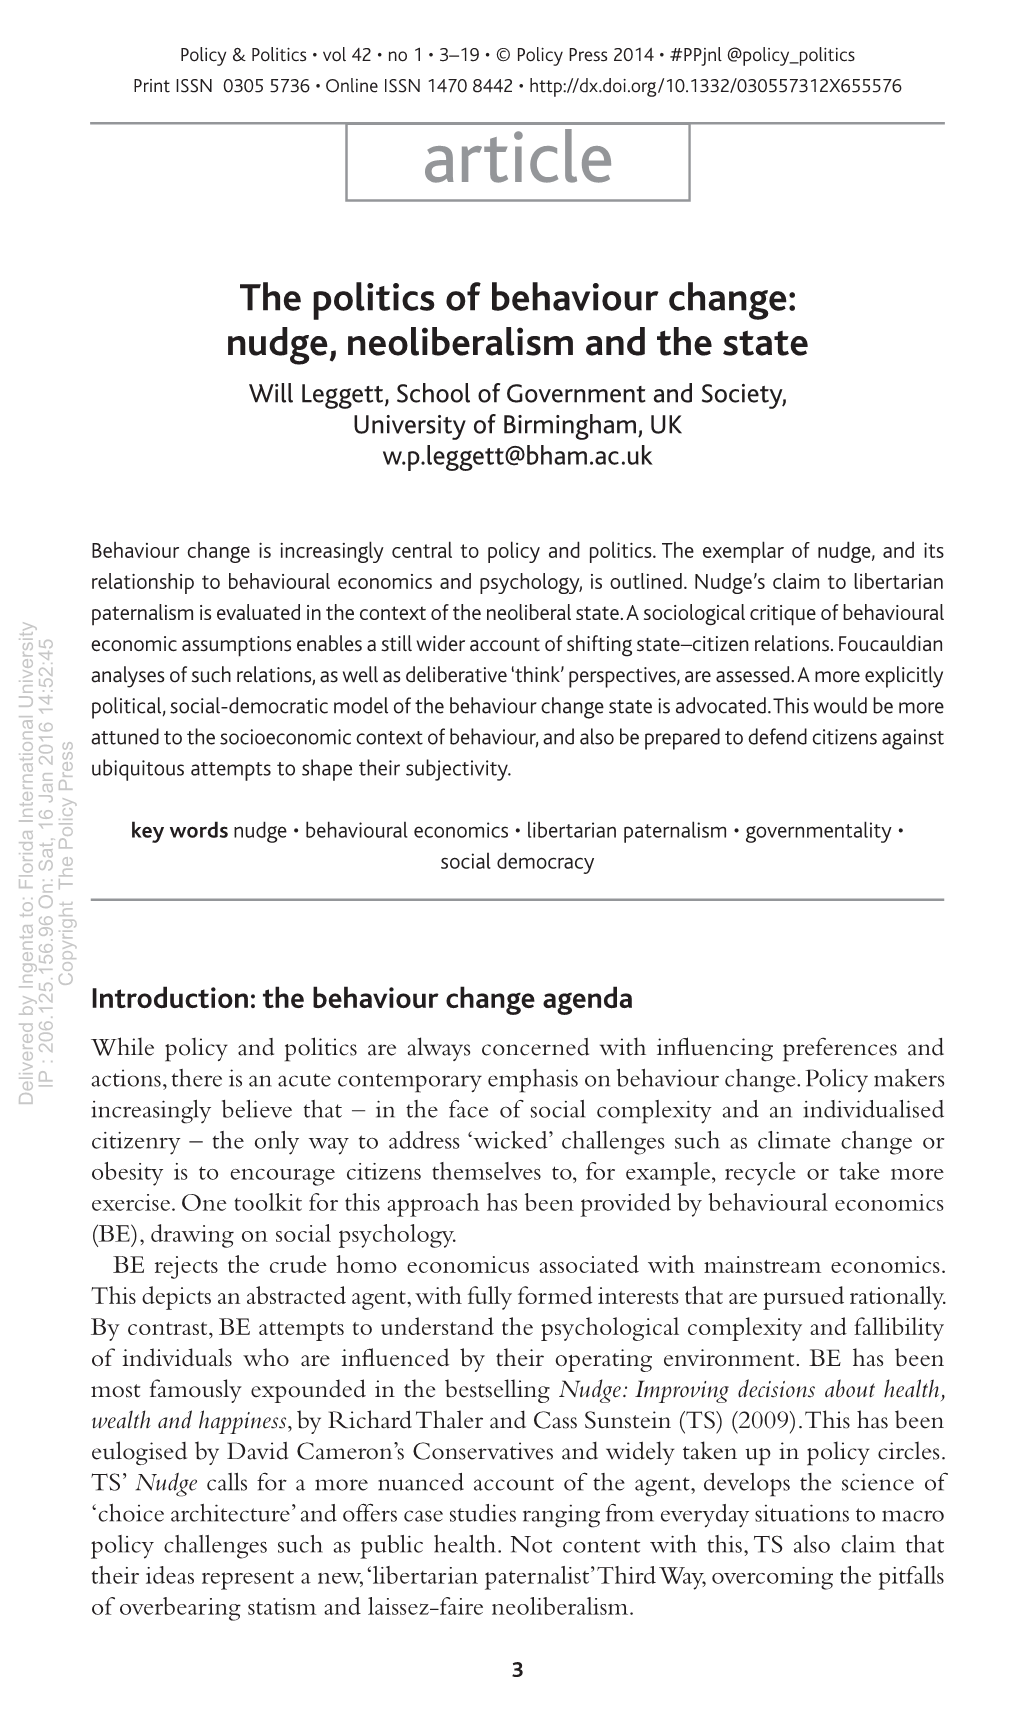 The Politics of Behaviour Change: Nudge, Neoliberalism and the State